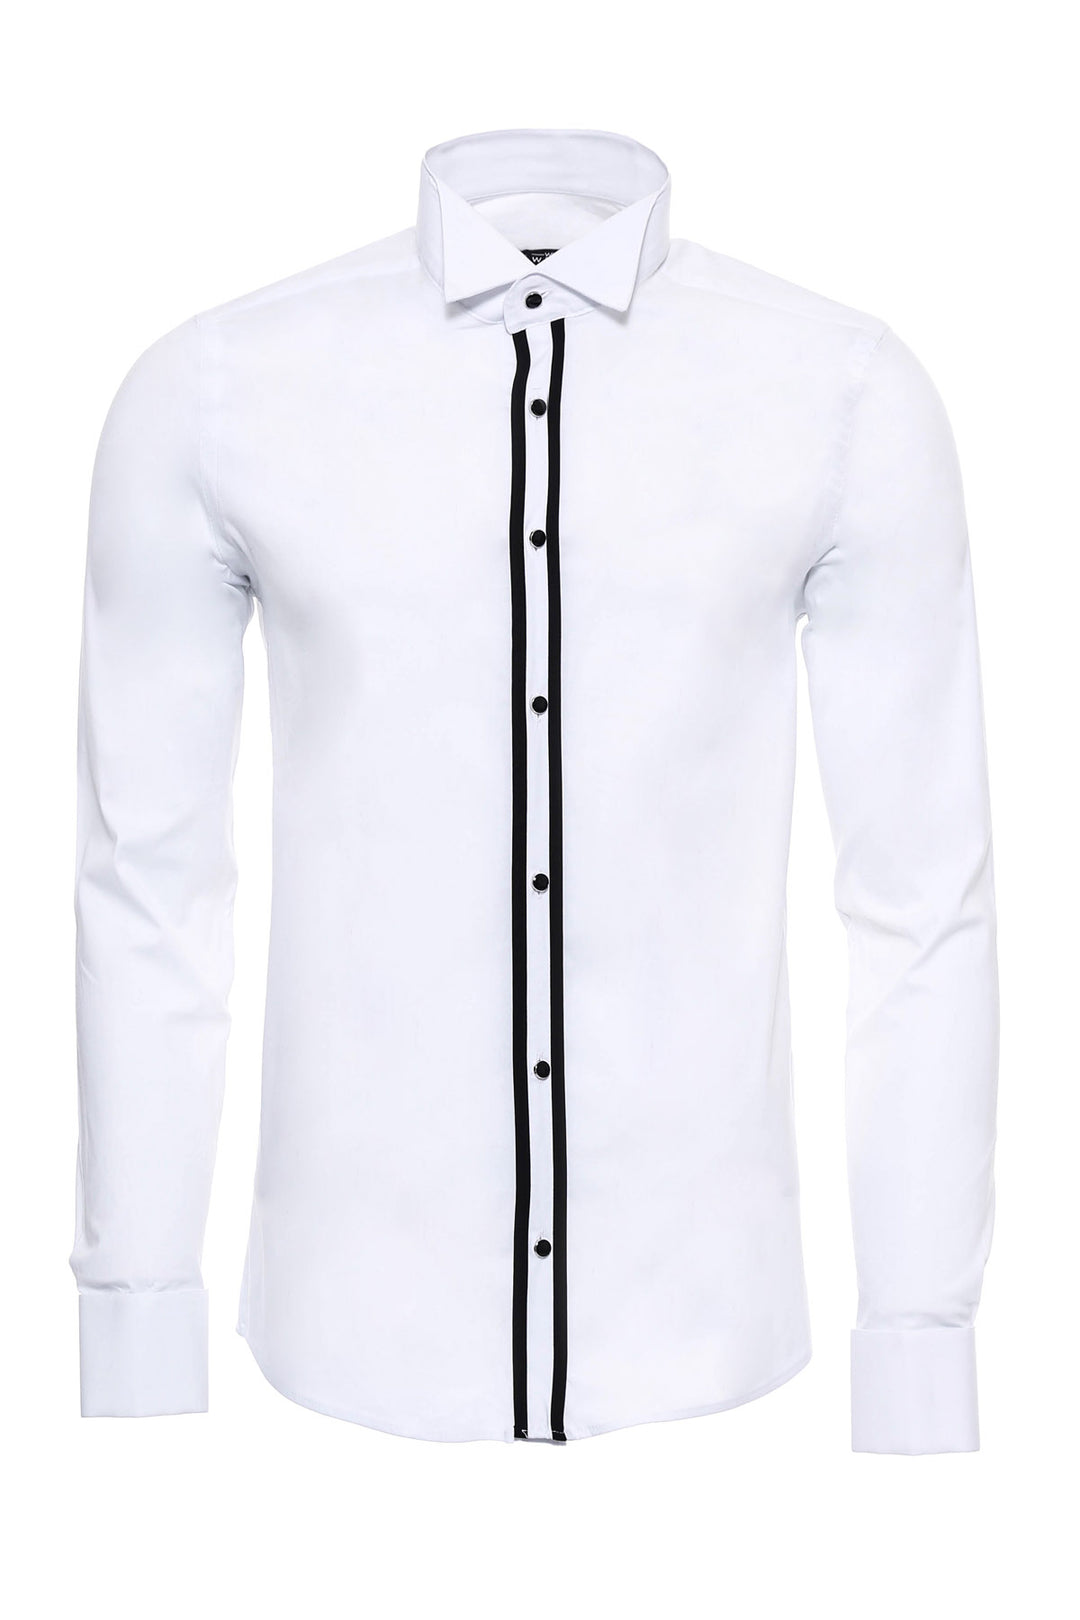 Button Detailed White Formal Shirt - Wessi